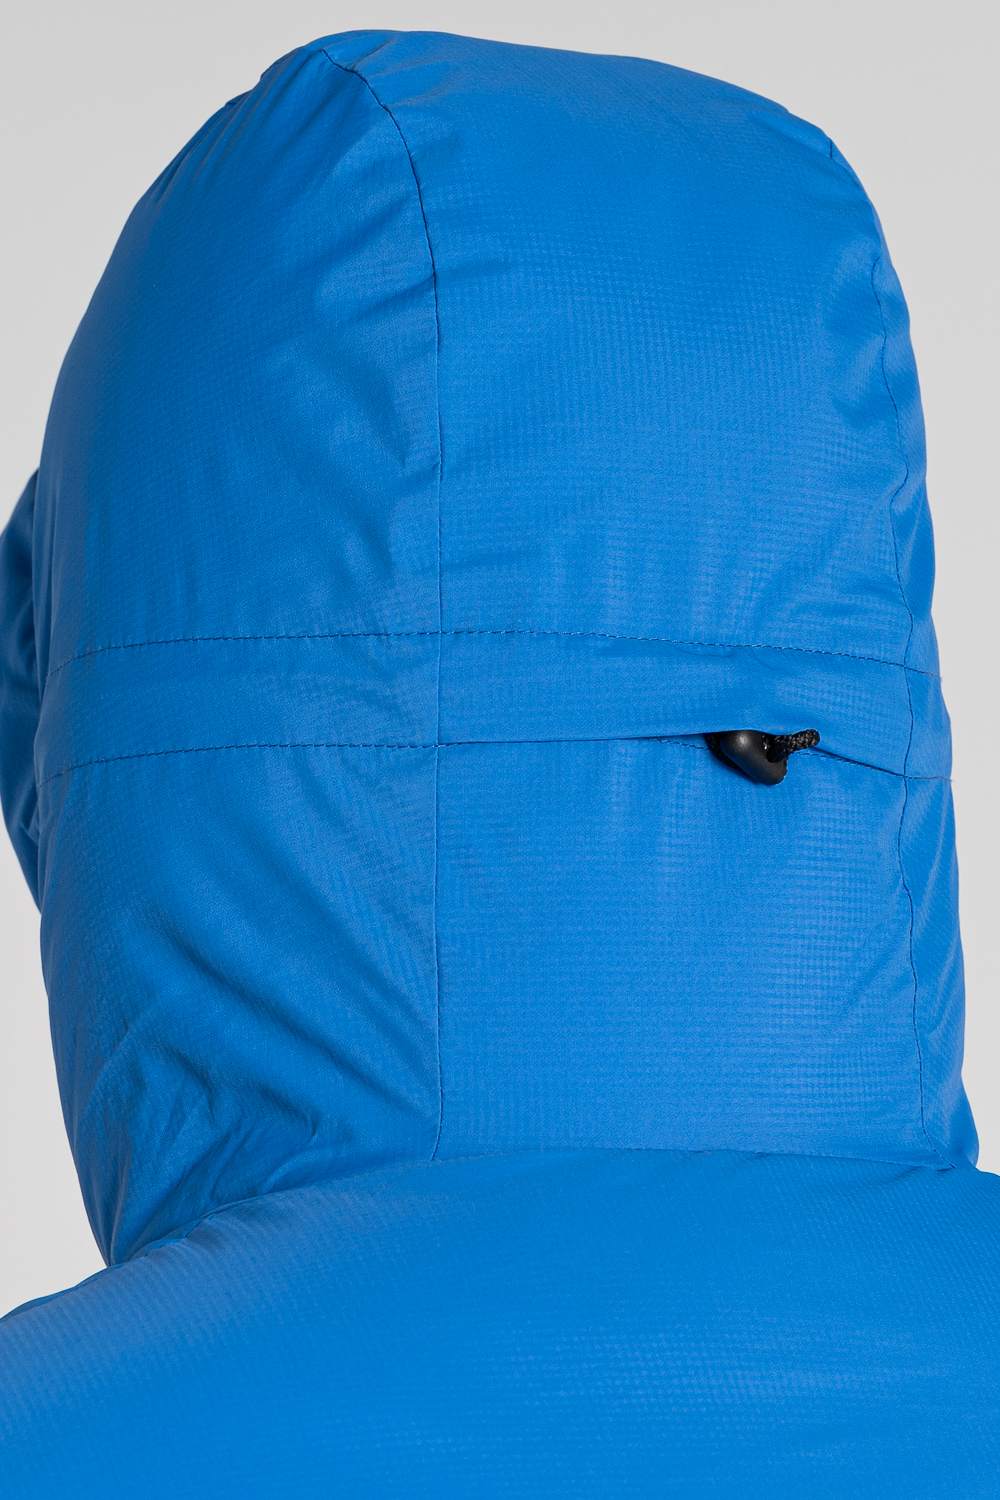 Craghoppers Sutherland Hooded Jacket in Picotee Blue